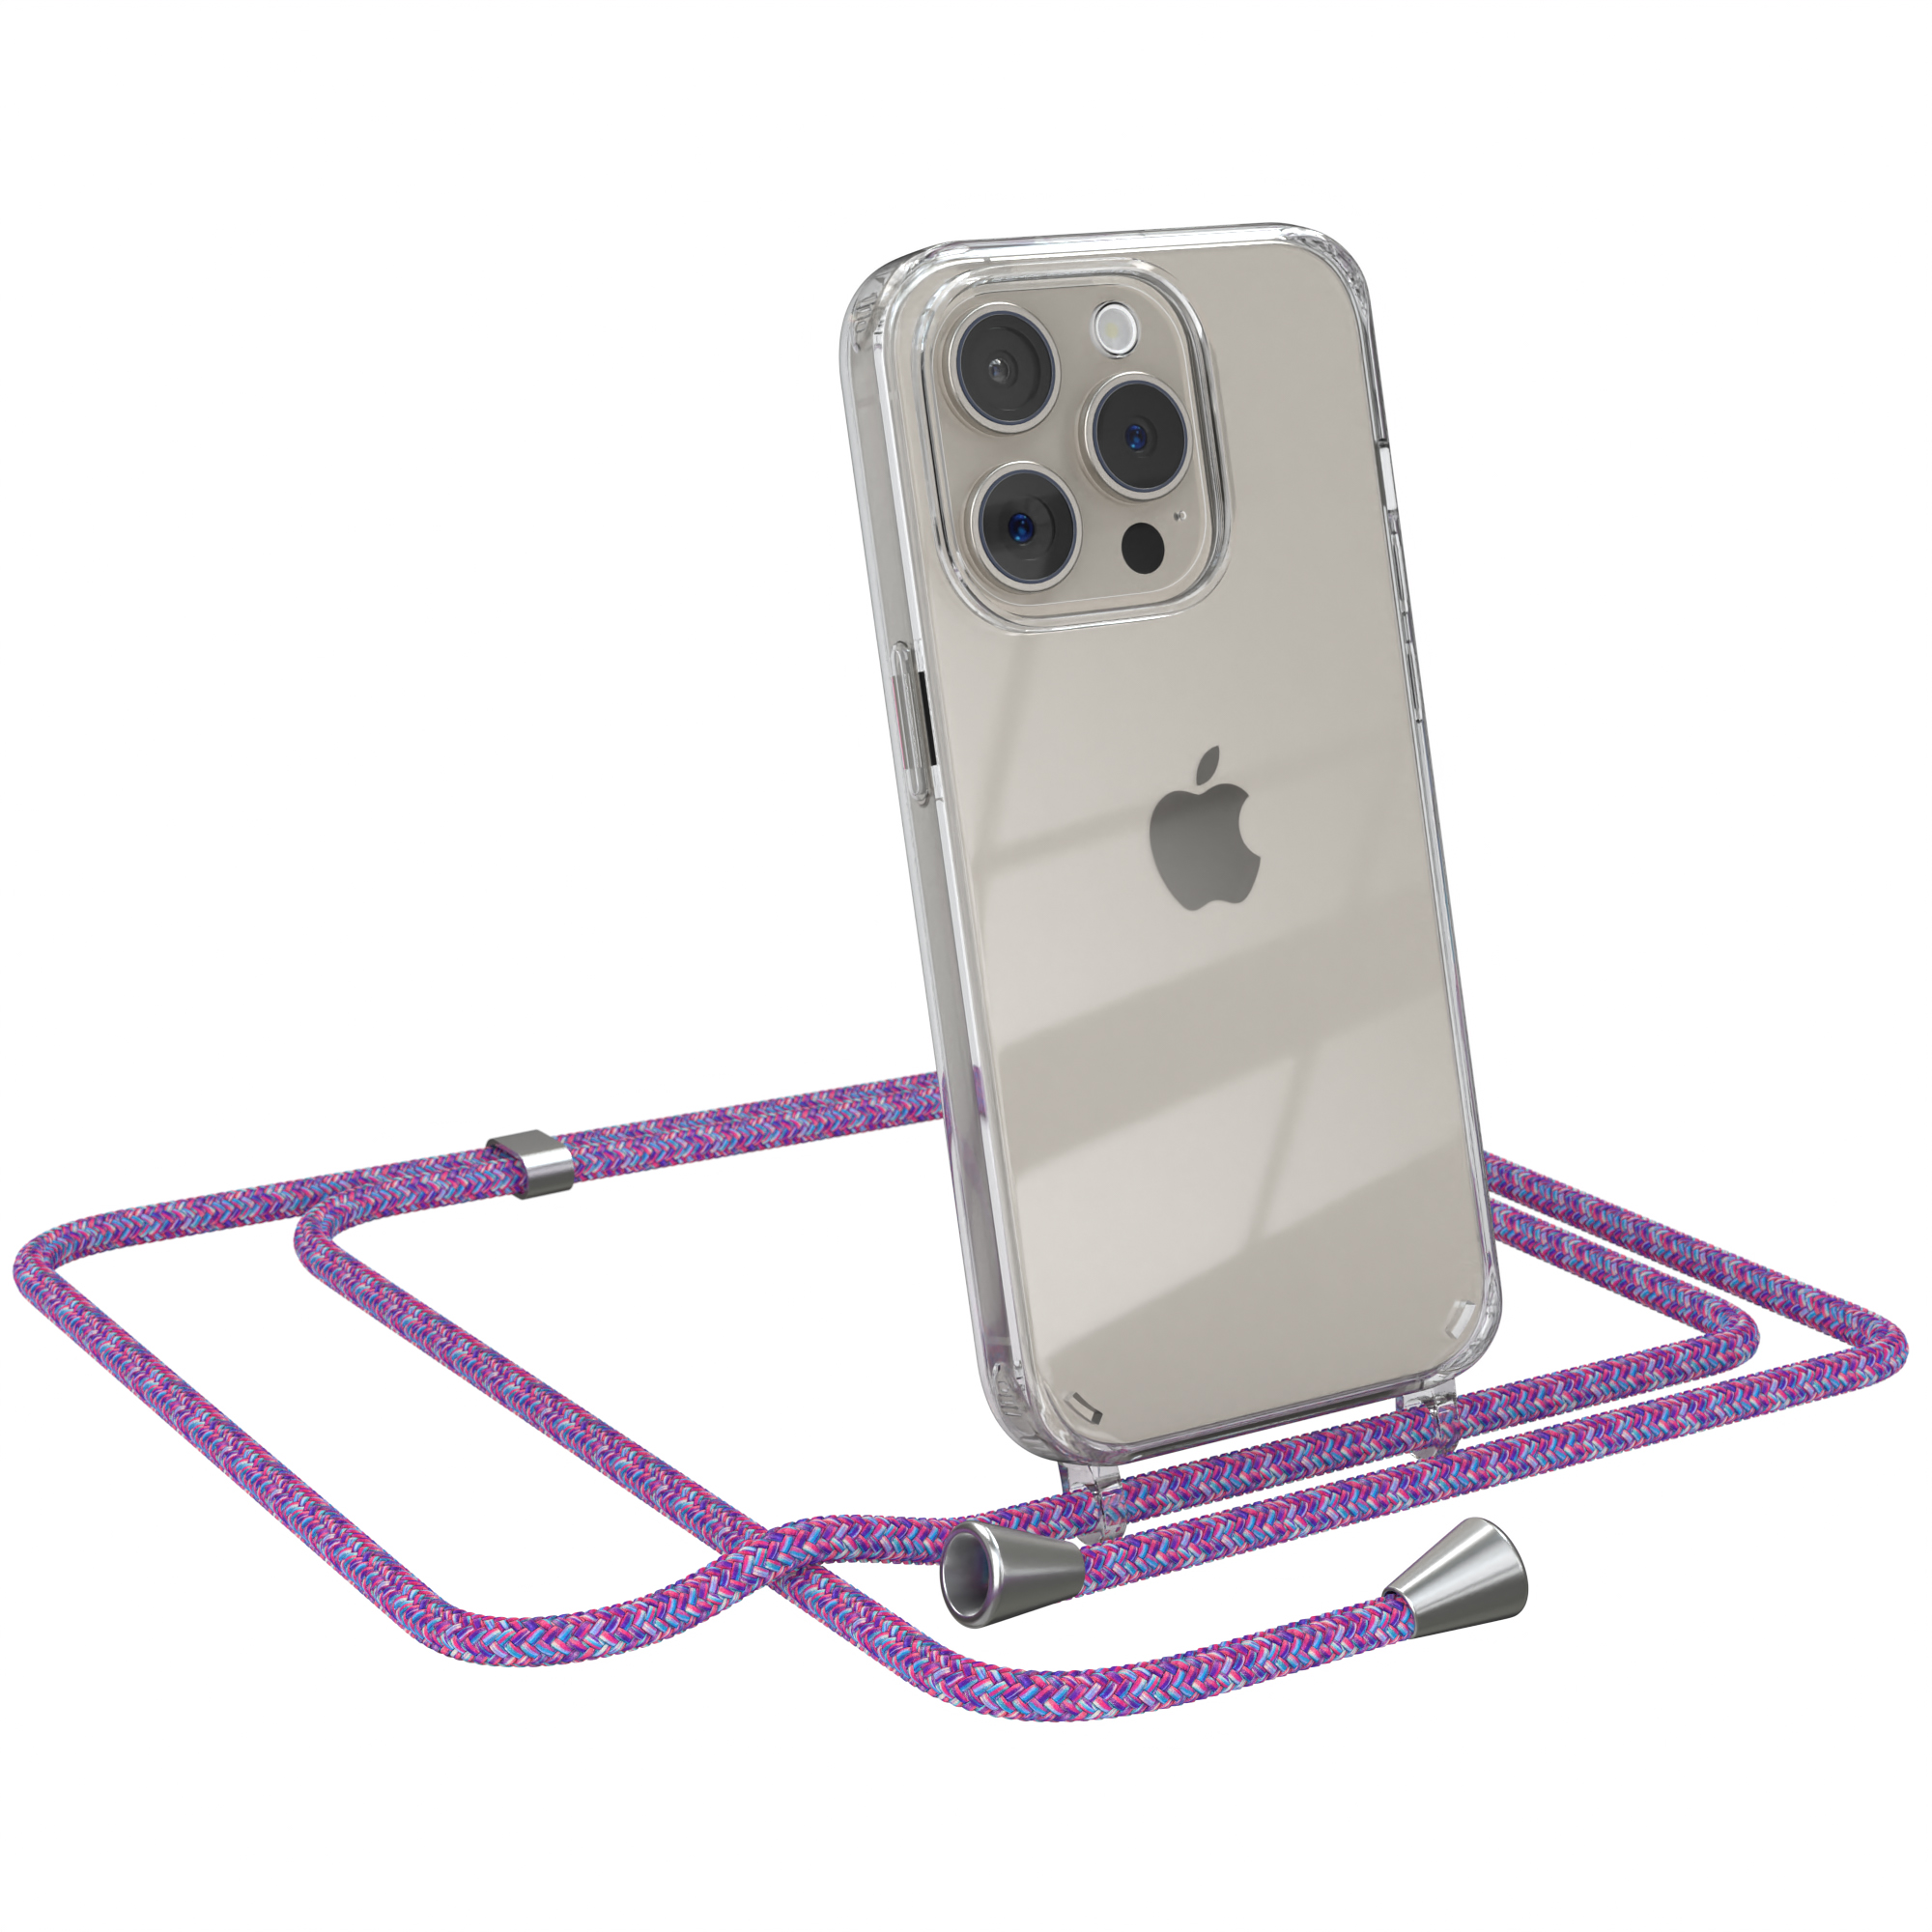 15 / Pro, iPhone Apple, Silber mit Clips CASE Cover EAZY Clear Umhängetasche, Umhängeband, Lila